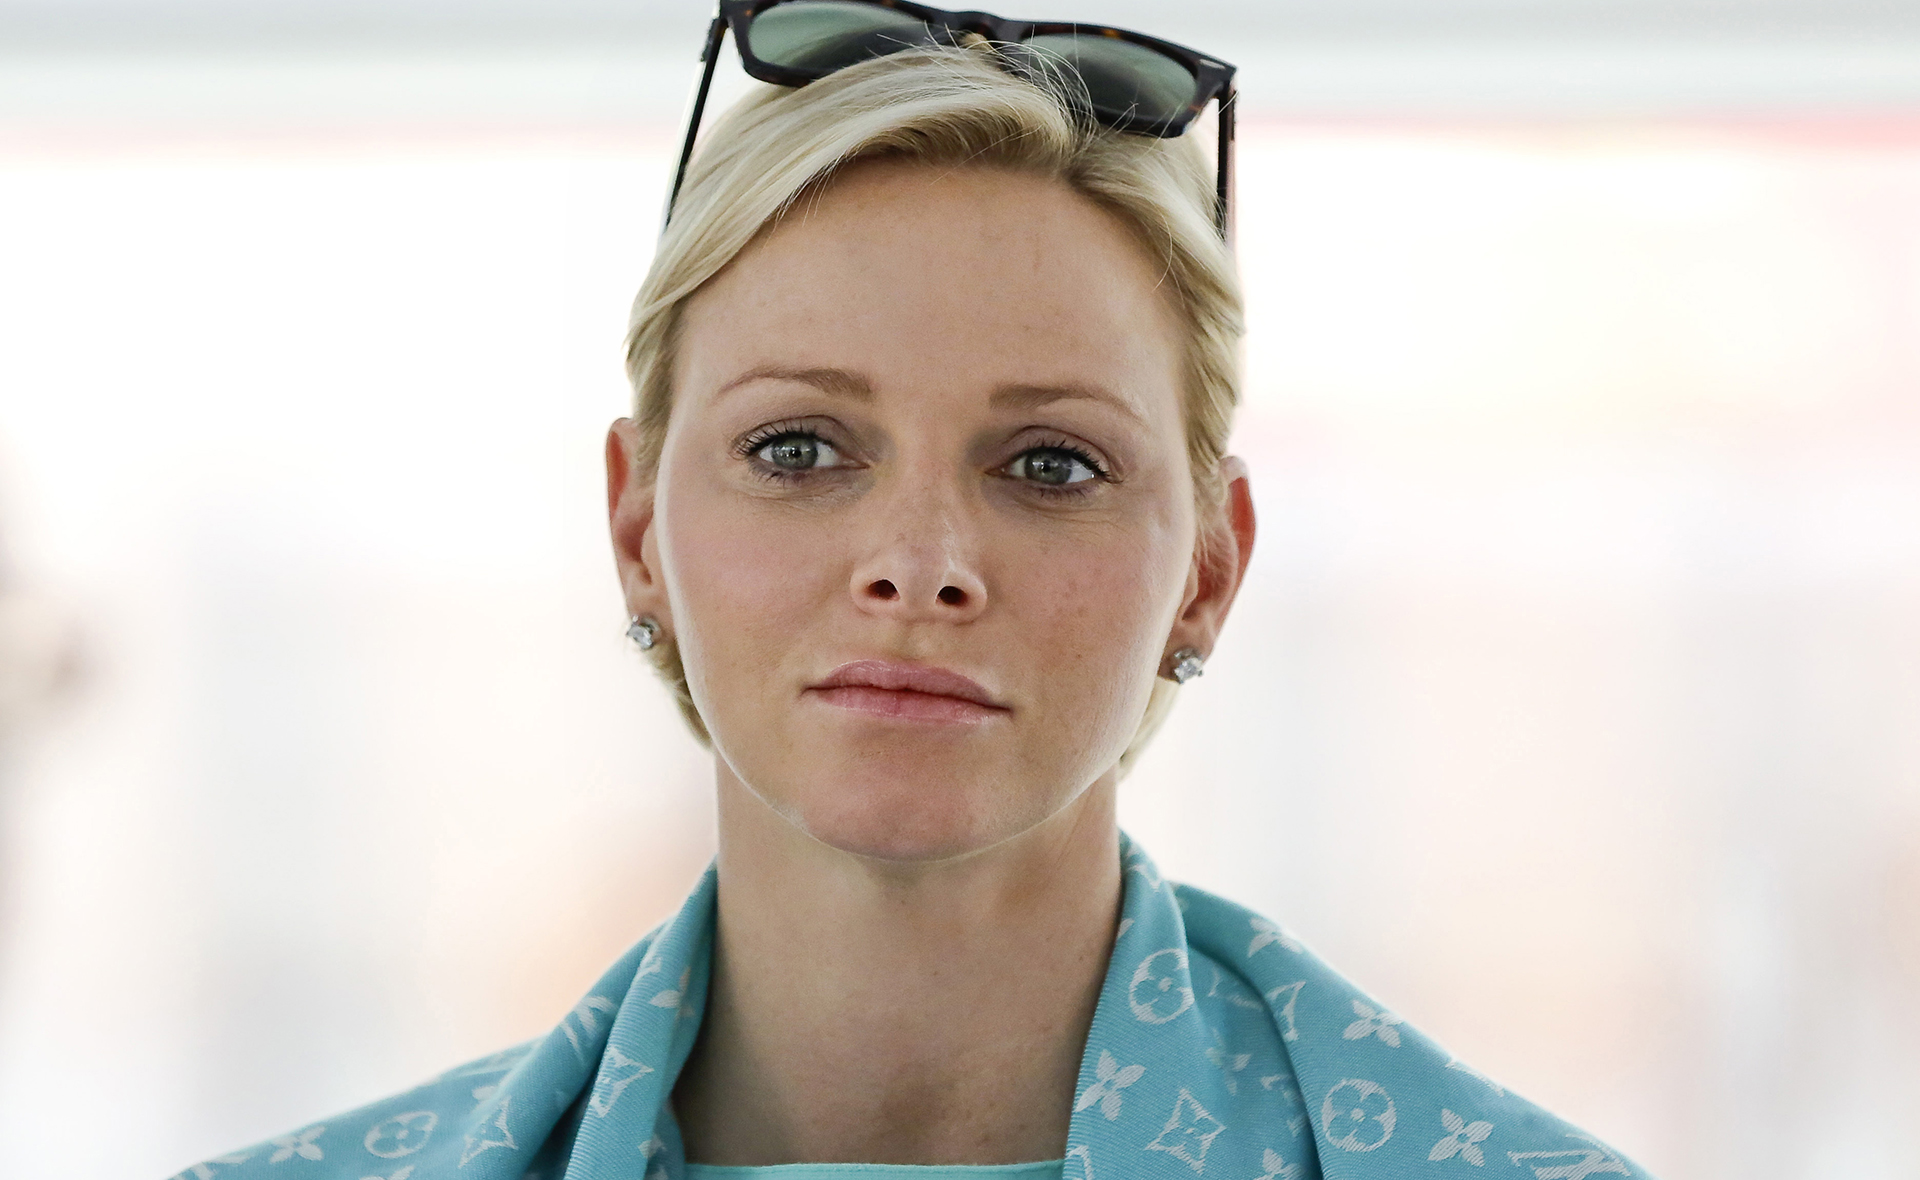 Princess Charlene’s tragic family loss amid the health battle that has kept her stranded in South Africa for months